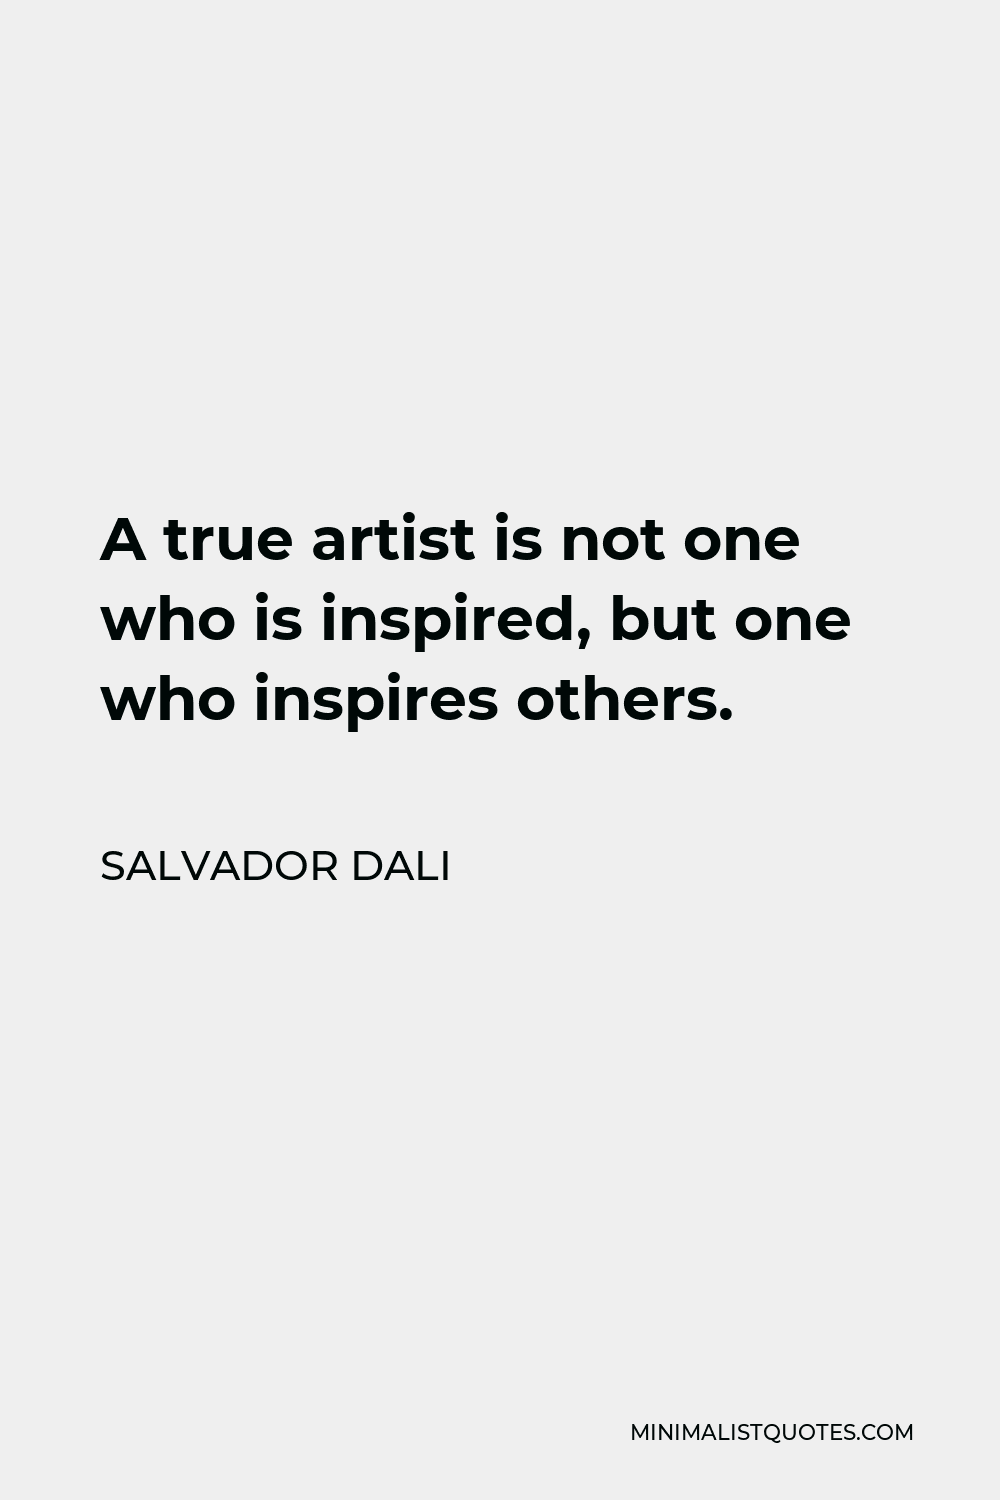 Salvador Dali Quote - A true artist is not one who is inspired, but one who inspires others.